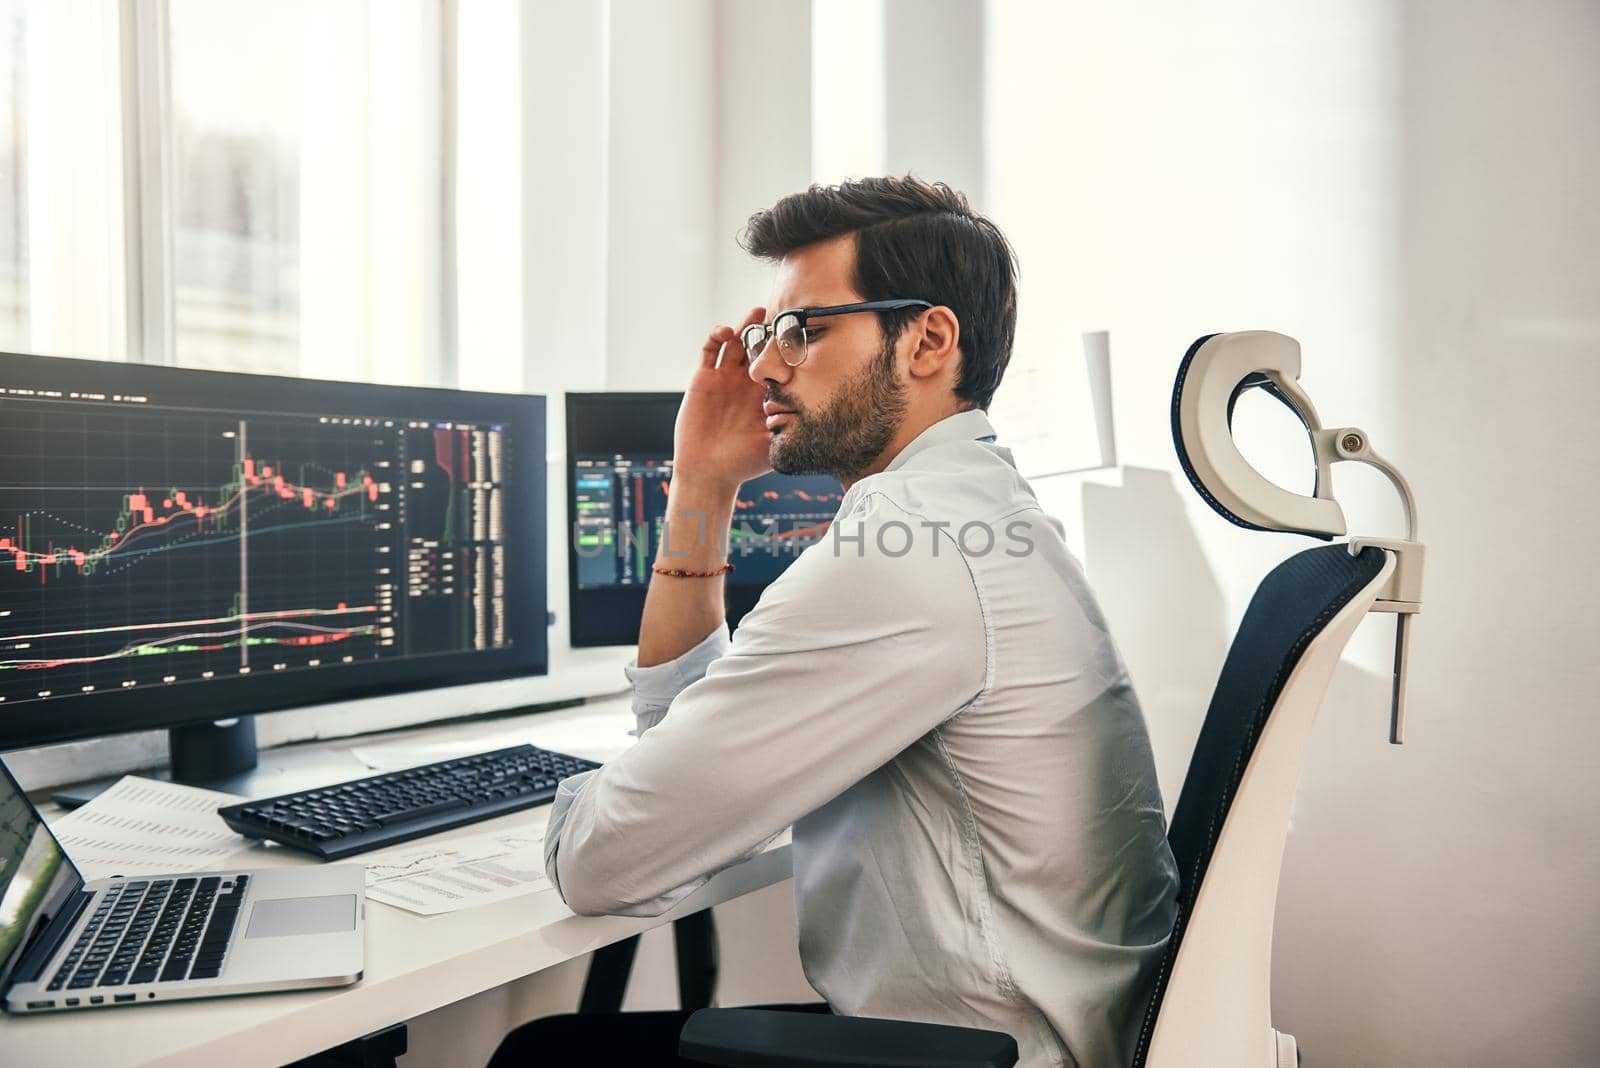 Full concentration. Young and smart businessman in formal wear is adjusting his eyeglasses and using laptop while while sitting in his office in front of computer screens with trading charts. Stock exchange. Trade concept. Investment concept